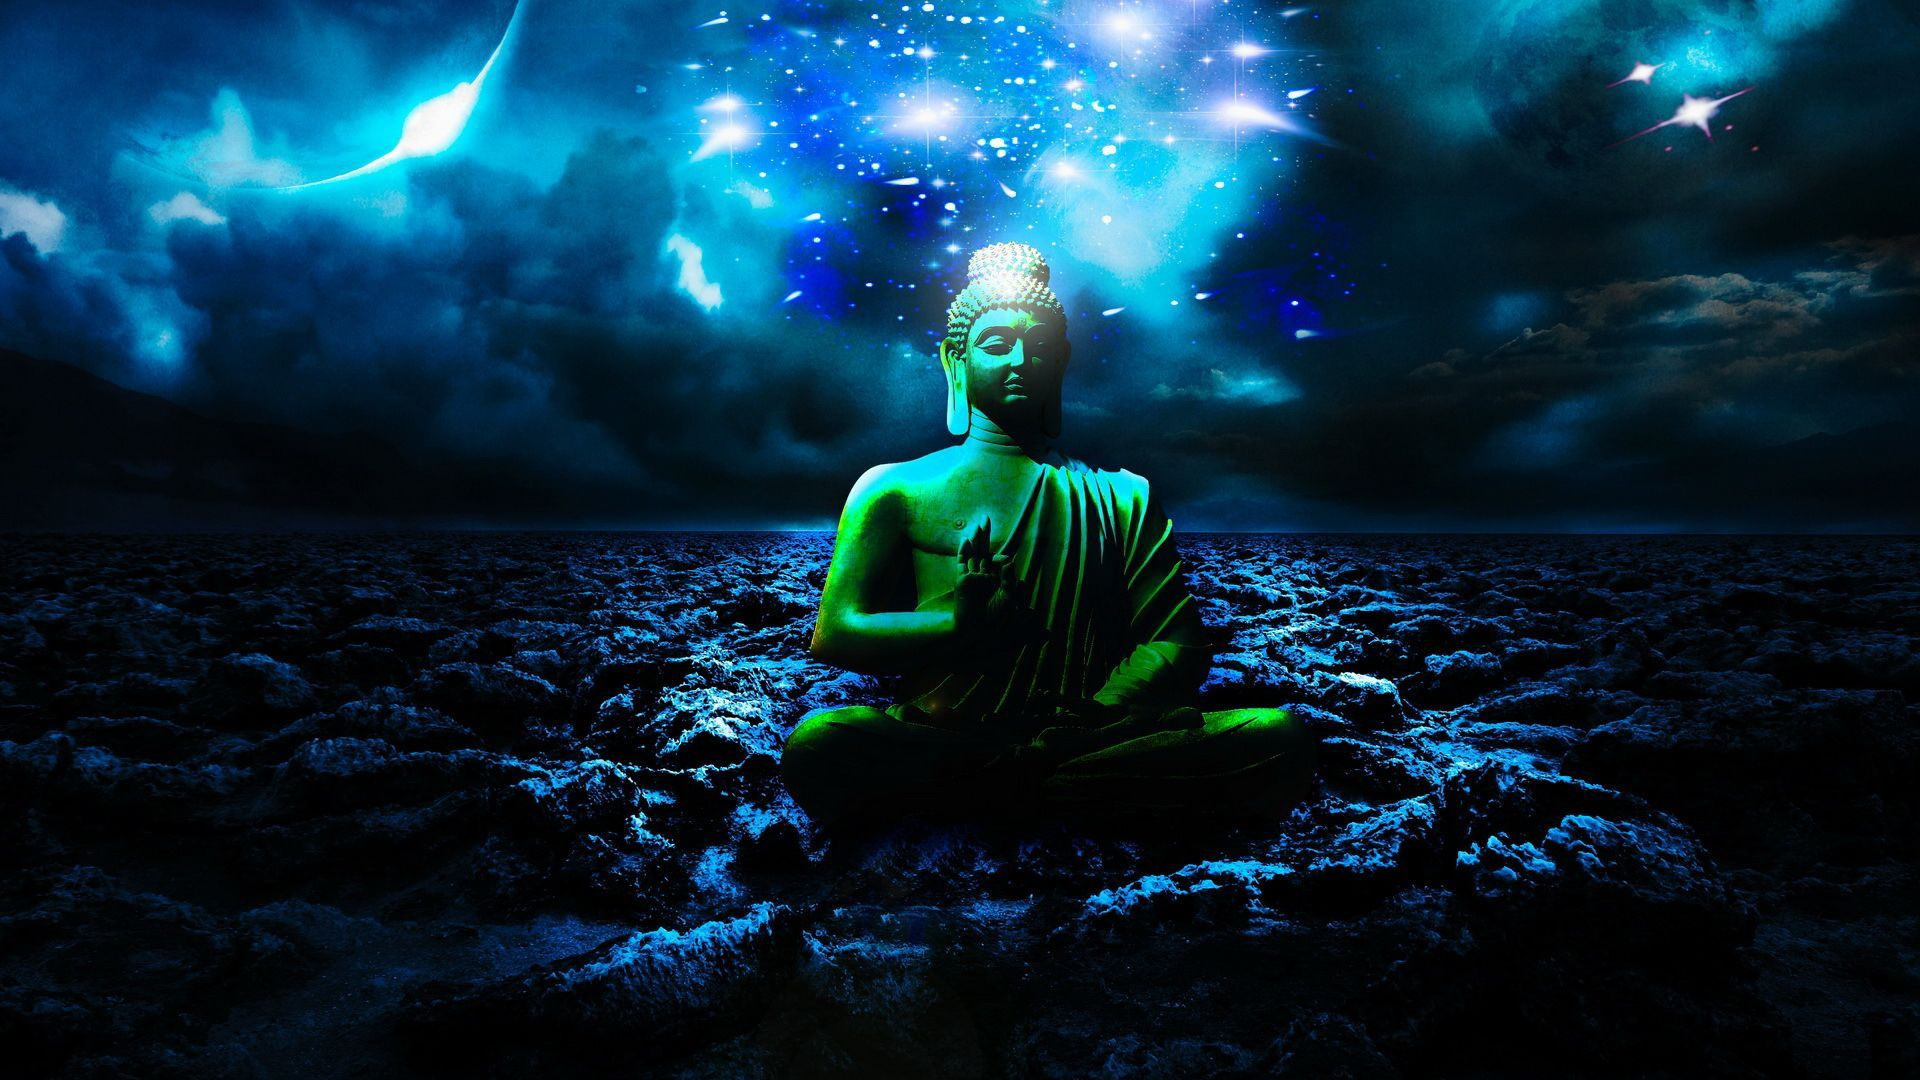 1920x1080 Buddha Meditation Wallpaper Photo px MB Other android art buddha wallpapers  chakra gallery hd inner peace iphone monk peace and serenity universe  widescreen ...